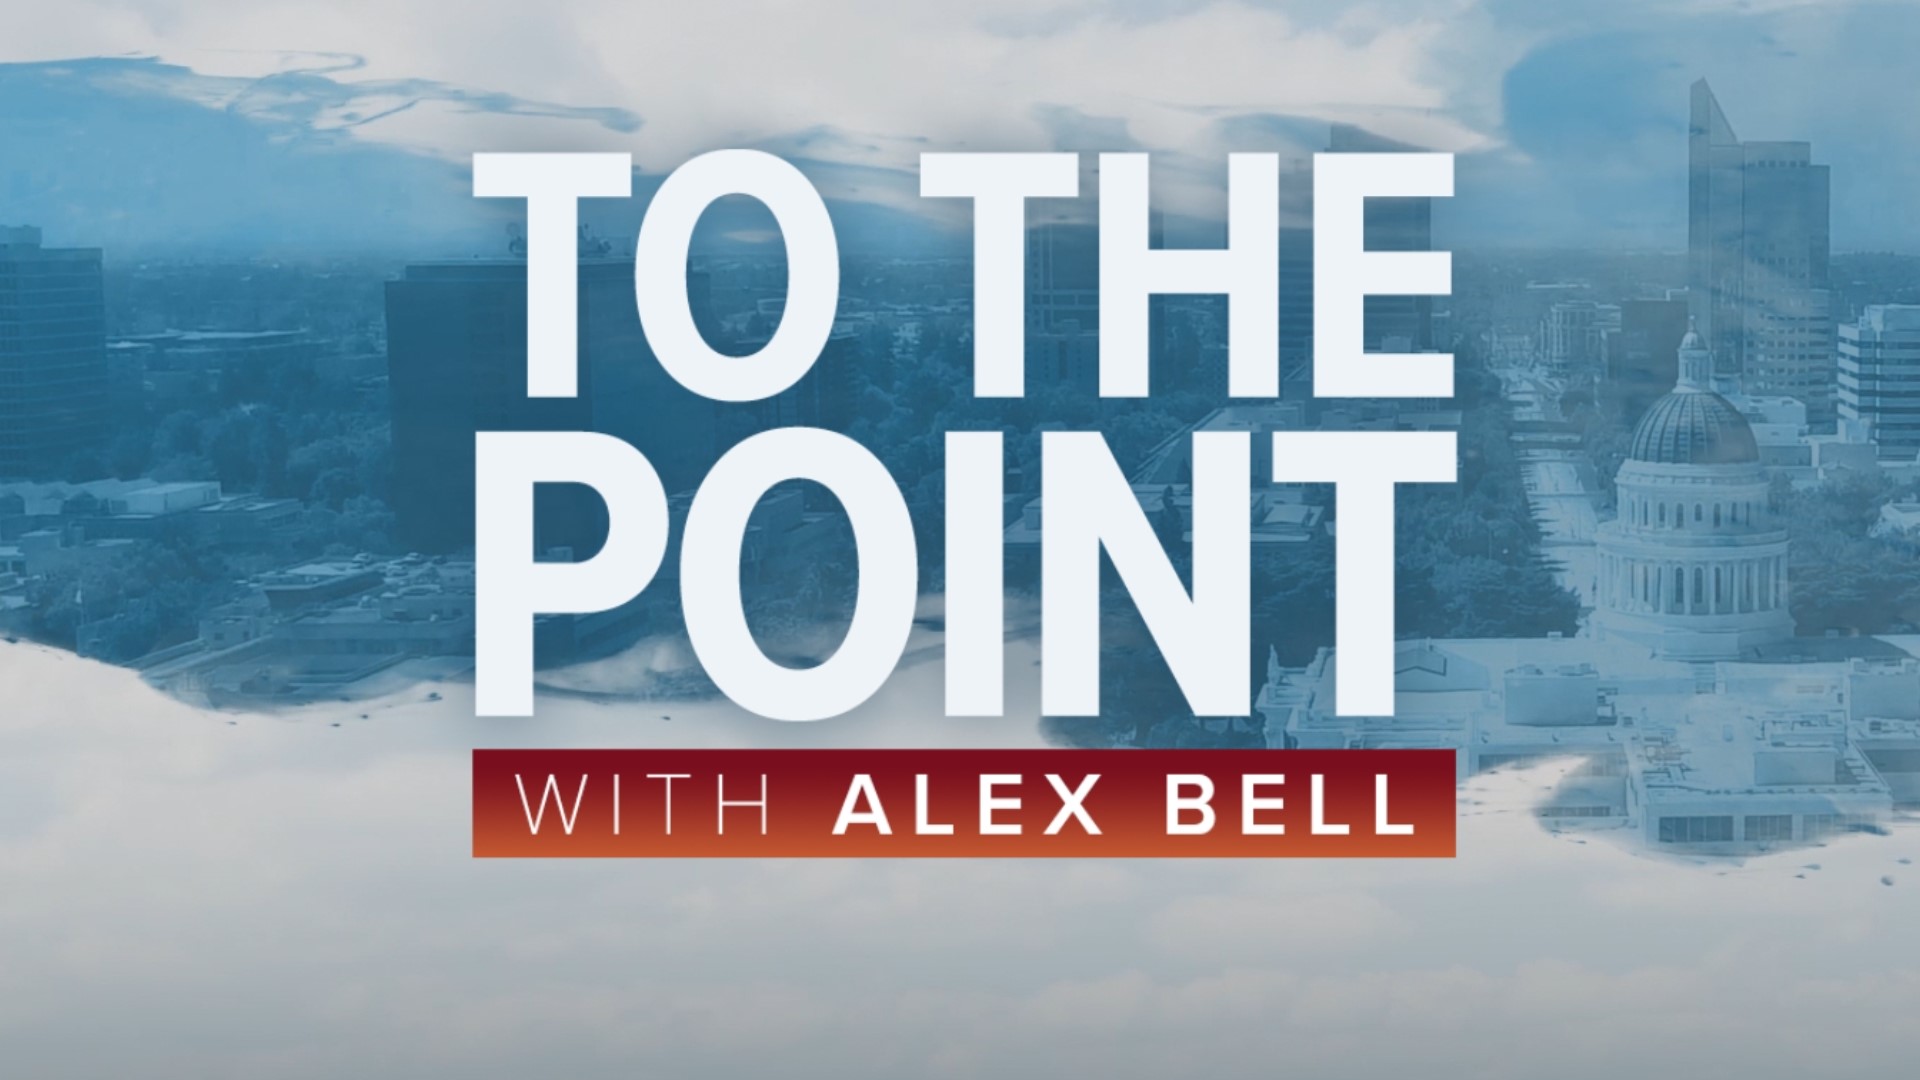 A special edition of "To The Point with Alex Bell" highlighting AAPI community members and cultures across our region.